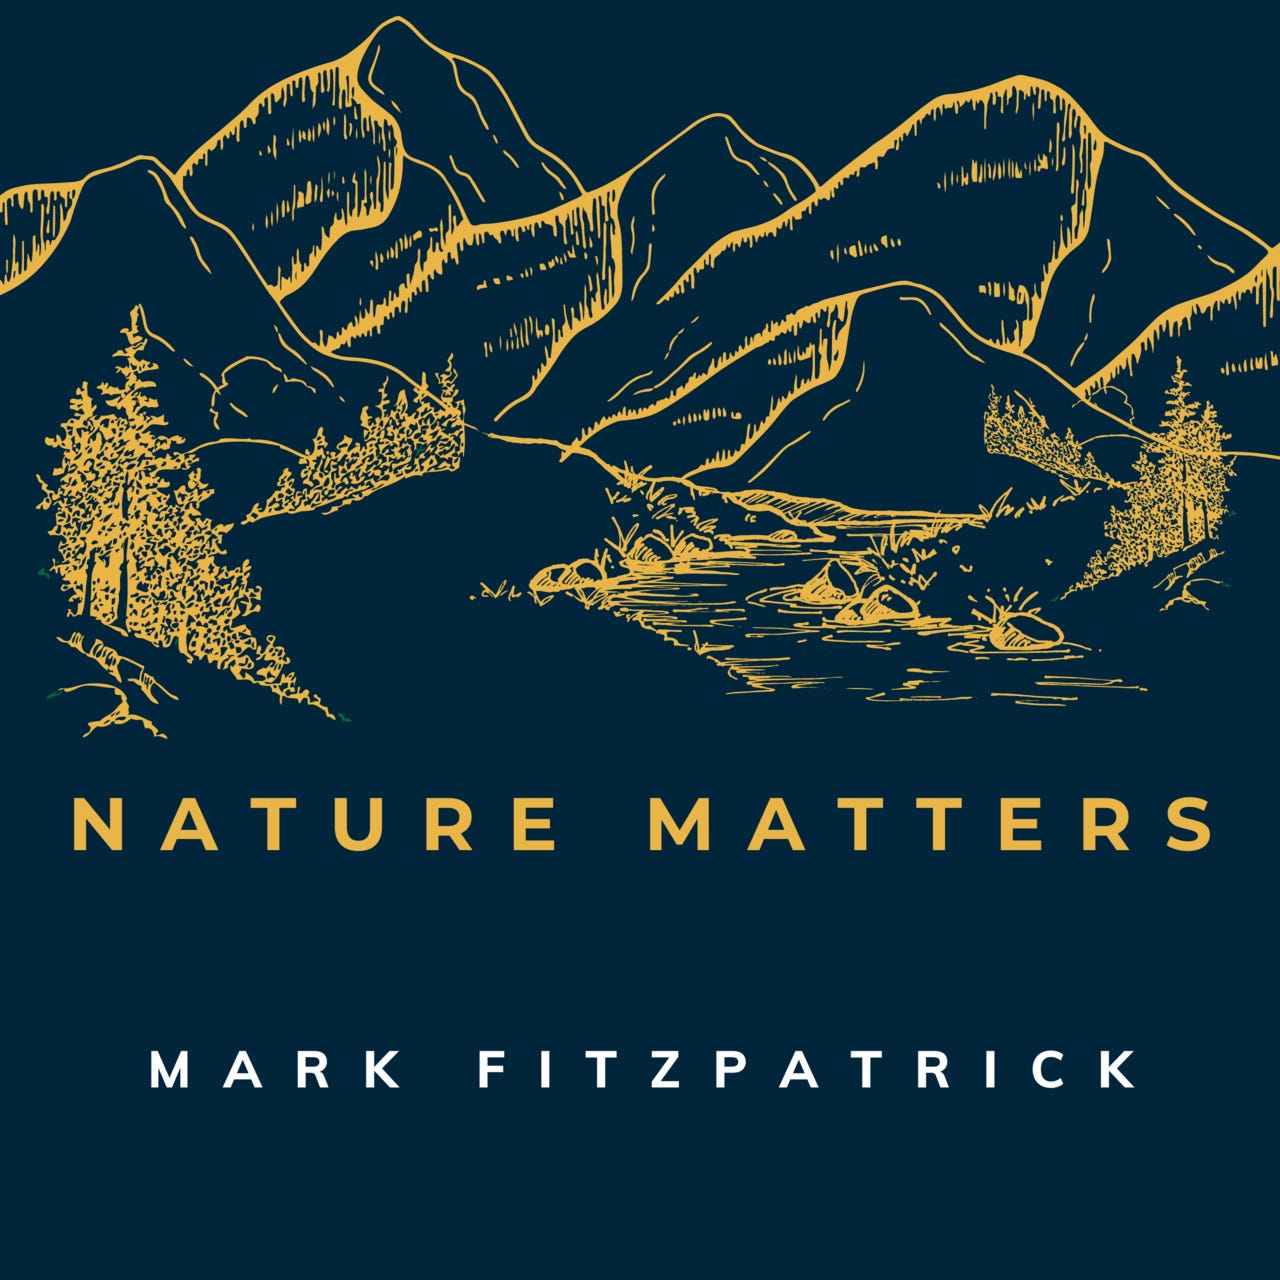 Artwork for Nature Matters by Mark Fitzpatrick